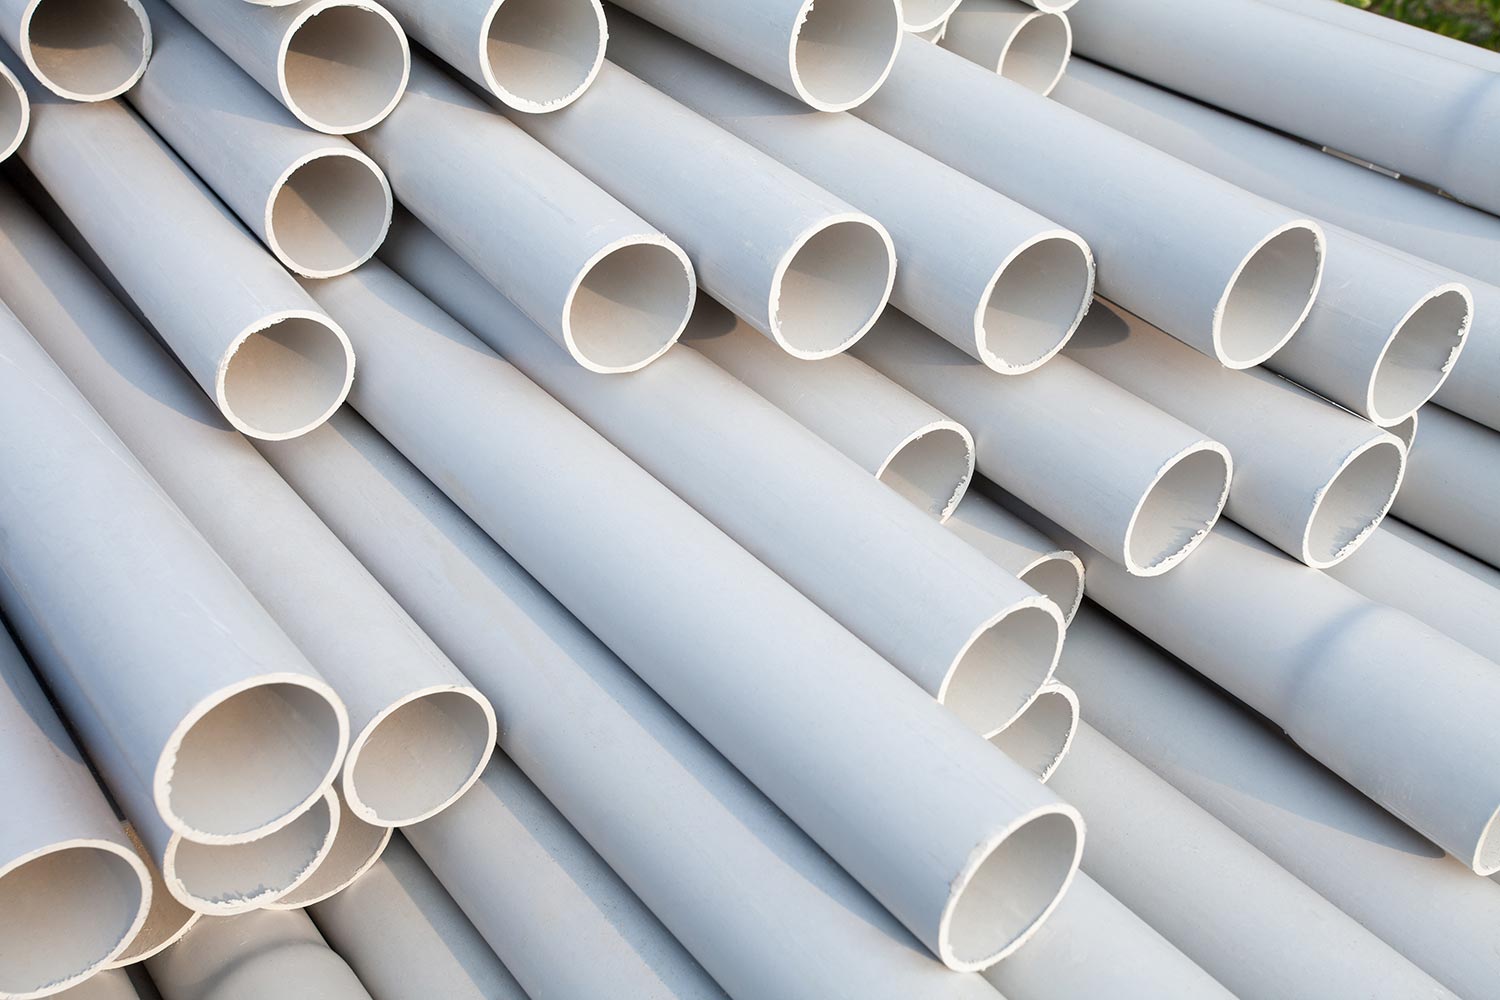 PVC pipes stacked at construction site